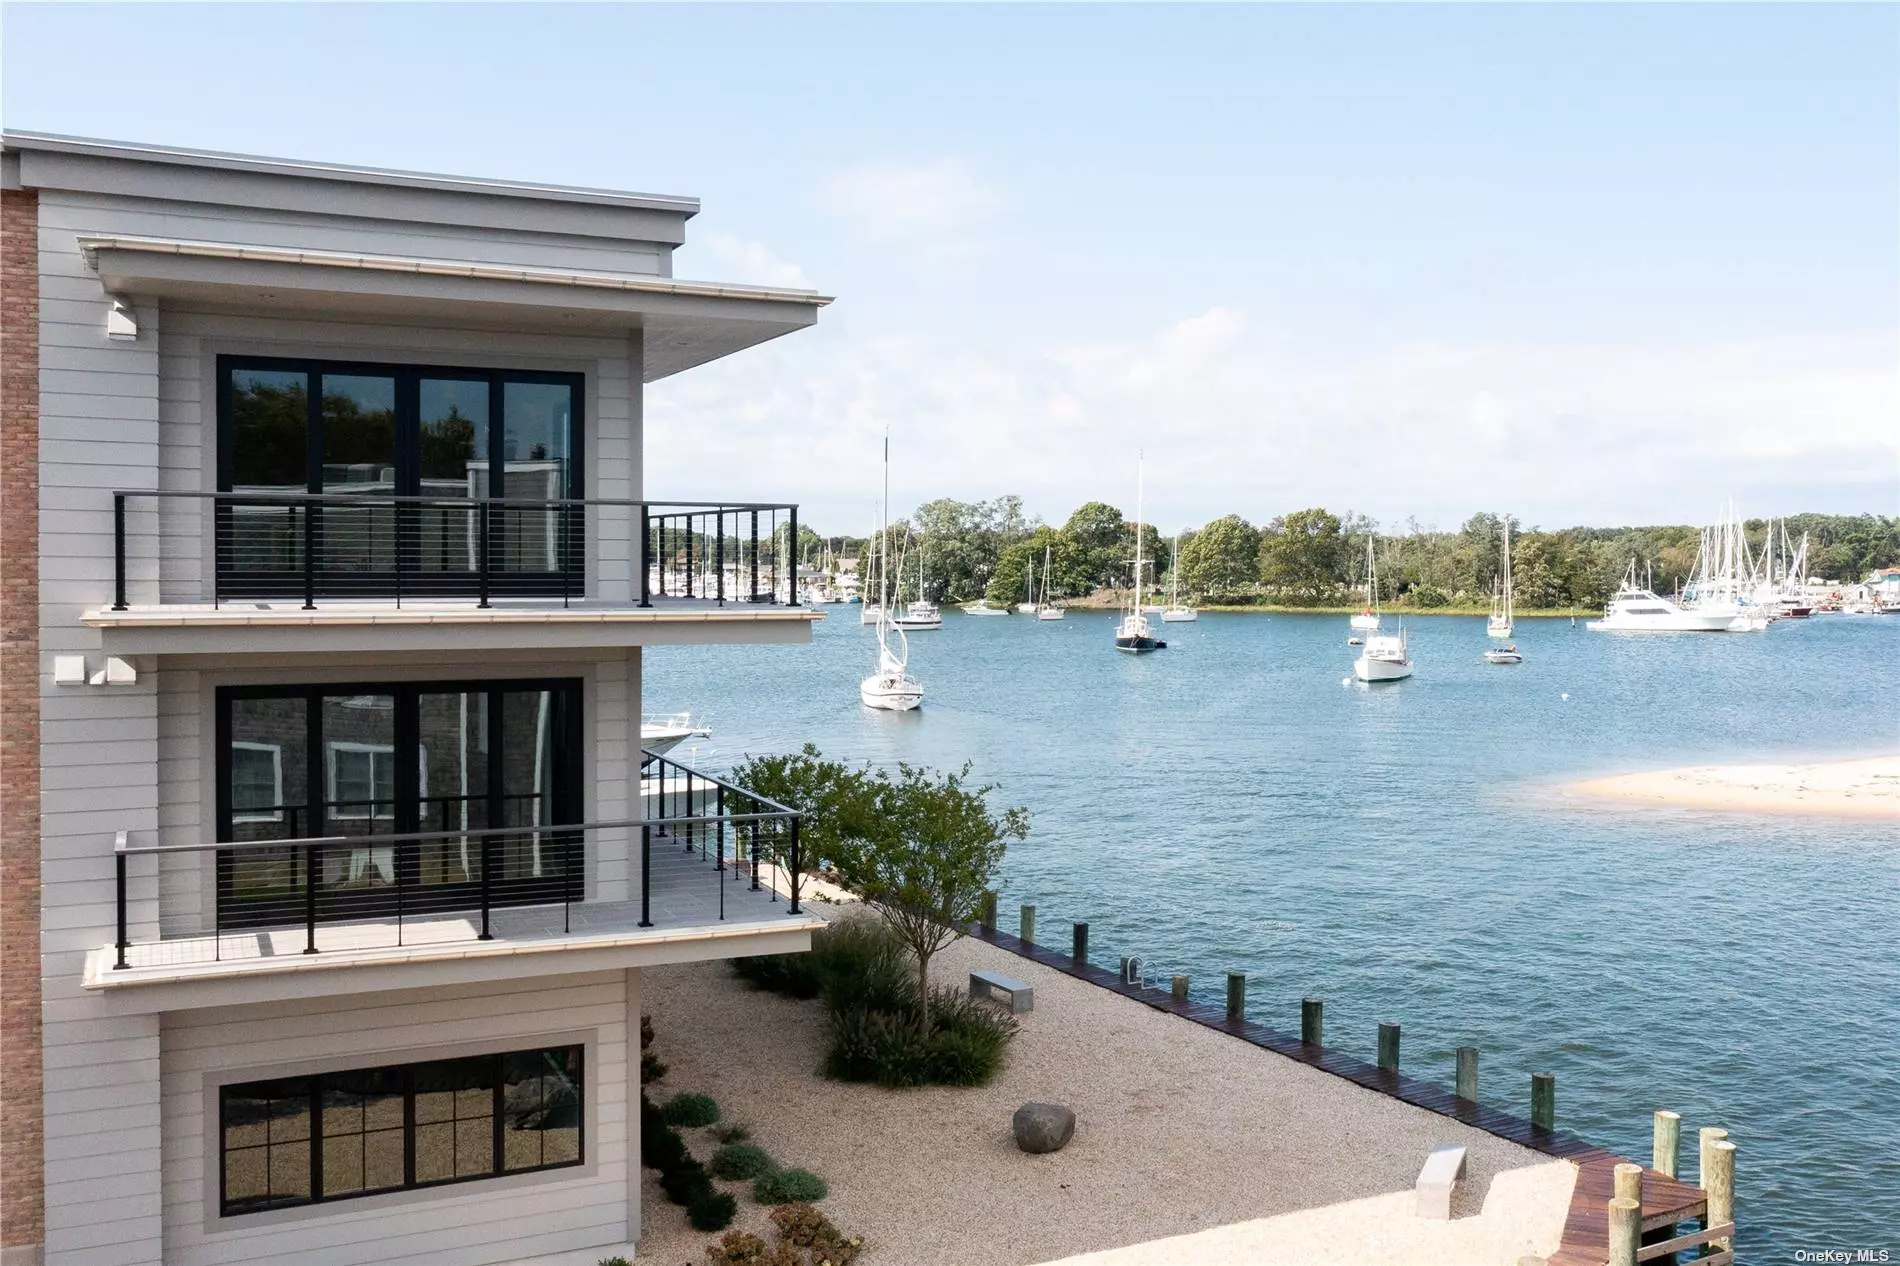 Perched above the water with expansive views of Greenport Harbor and Stirling Basin, 123 Stirling offers modern luxury on one of Greenport Village&rsquo;s most beautiful residential streets. Each unit includes a private boat slip, dedicated indoor and outdoor parking spaces, in-unit laundry and ground floor maritime space with a half bath. Four blocks from the center of the village&rsquo;s shops, restaurants, and galleries. Great proximity to Jitney and LIRR for easy access to NYC. Unit 4 features two bedrooms, two full baths, and one half-bath. Open-concept kitchen/dining/living room. 459 sq ft maritime space with an additional half bath. Sale is subject to the terms & conditions of an offering plan.